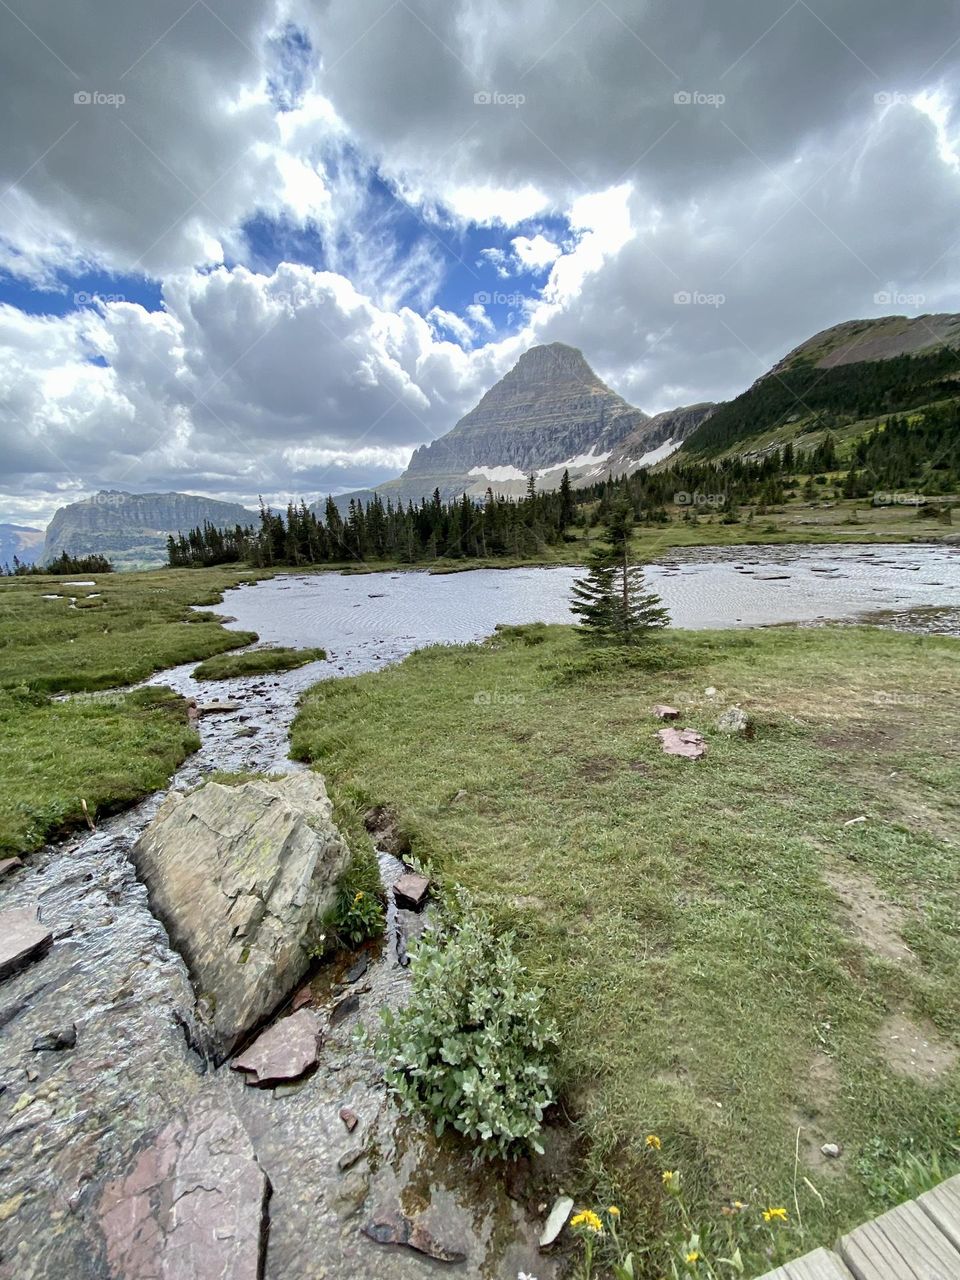 A mountain looms behind a small pond under a cloudy blue sky.